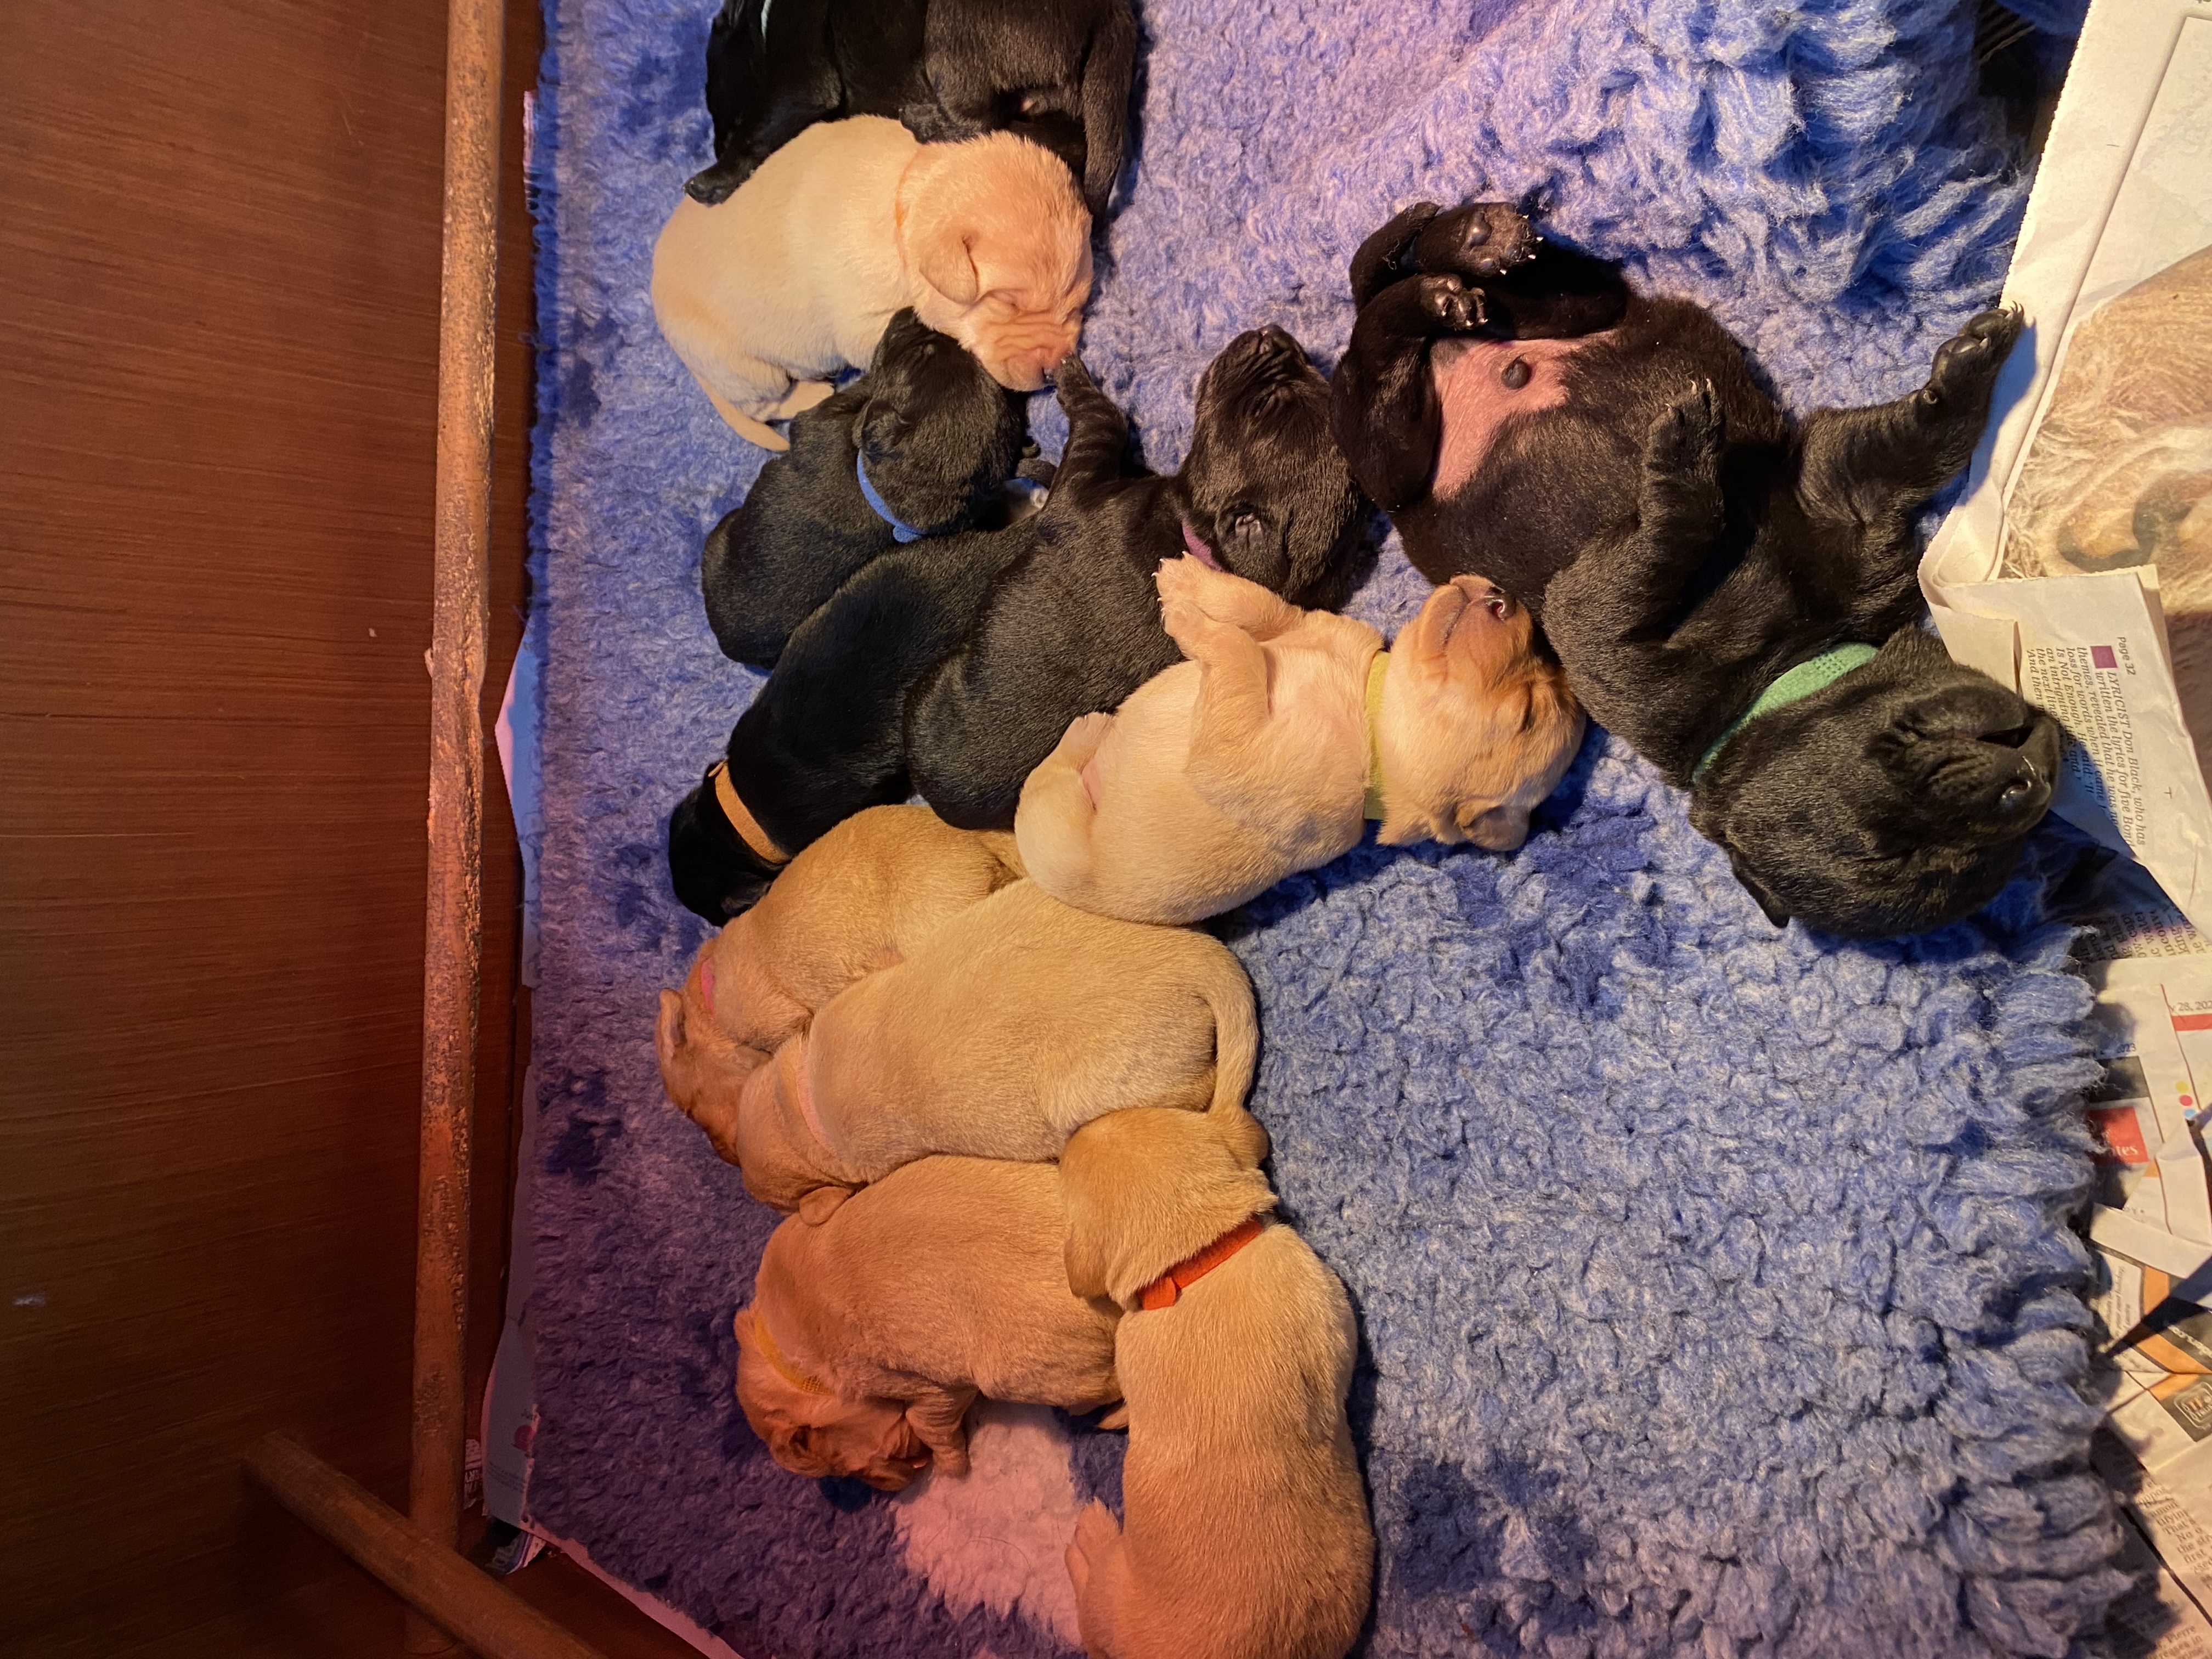 Diglake villanelle has produced a beautiful litter of 11 puppies